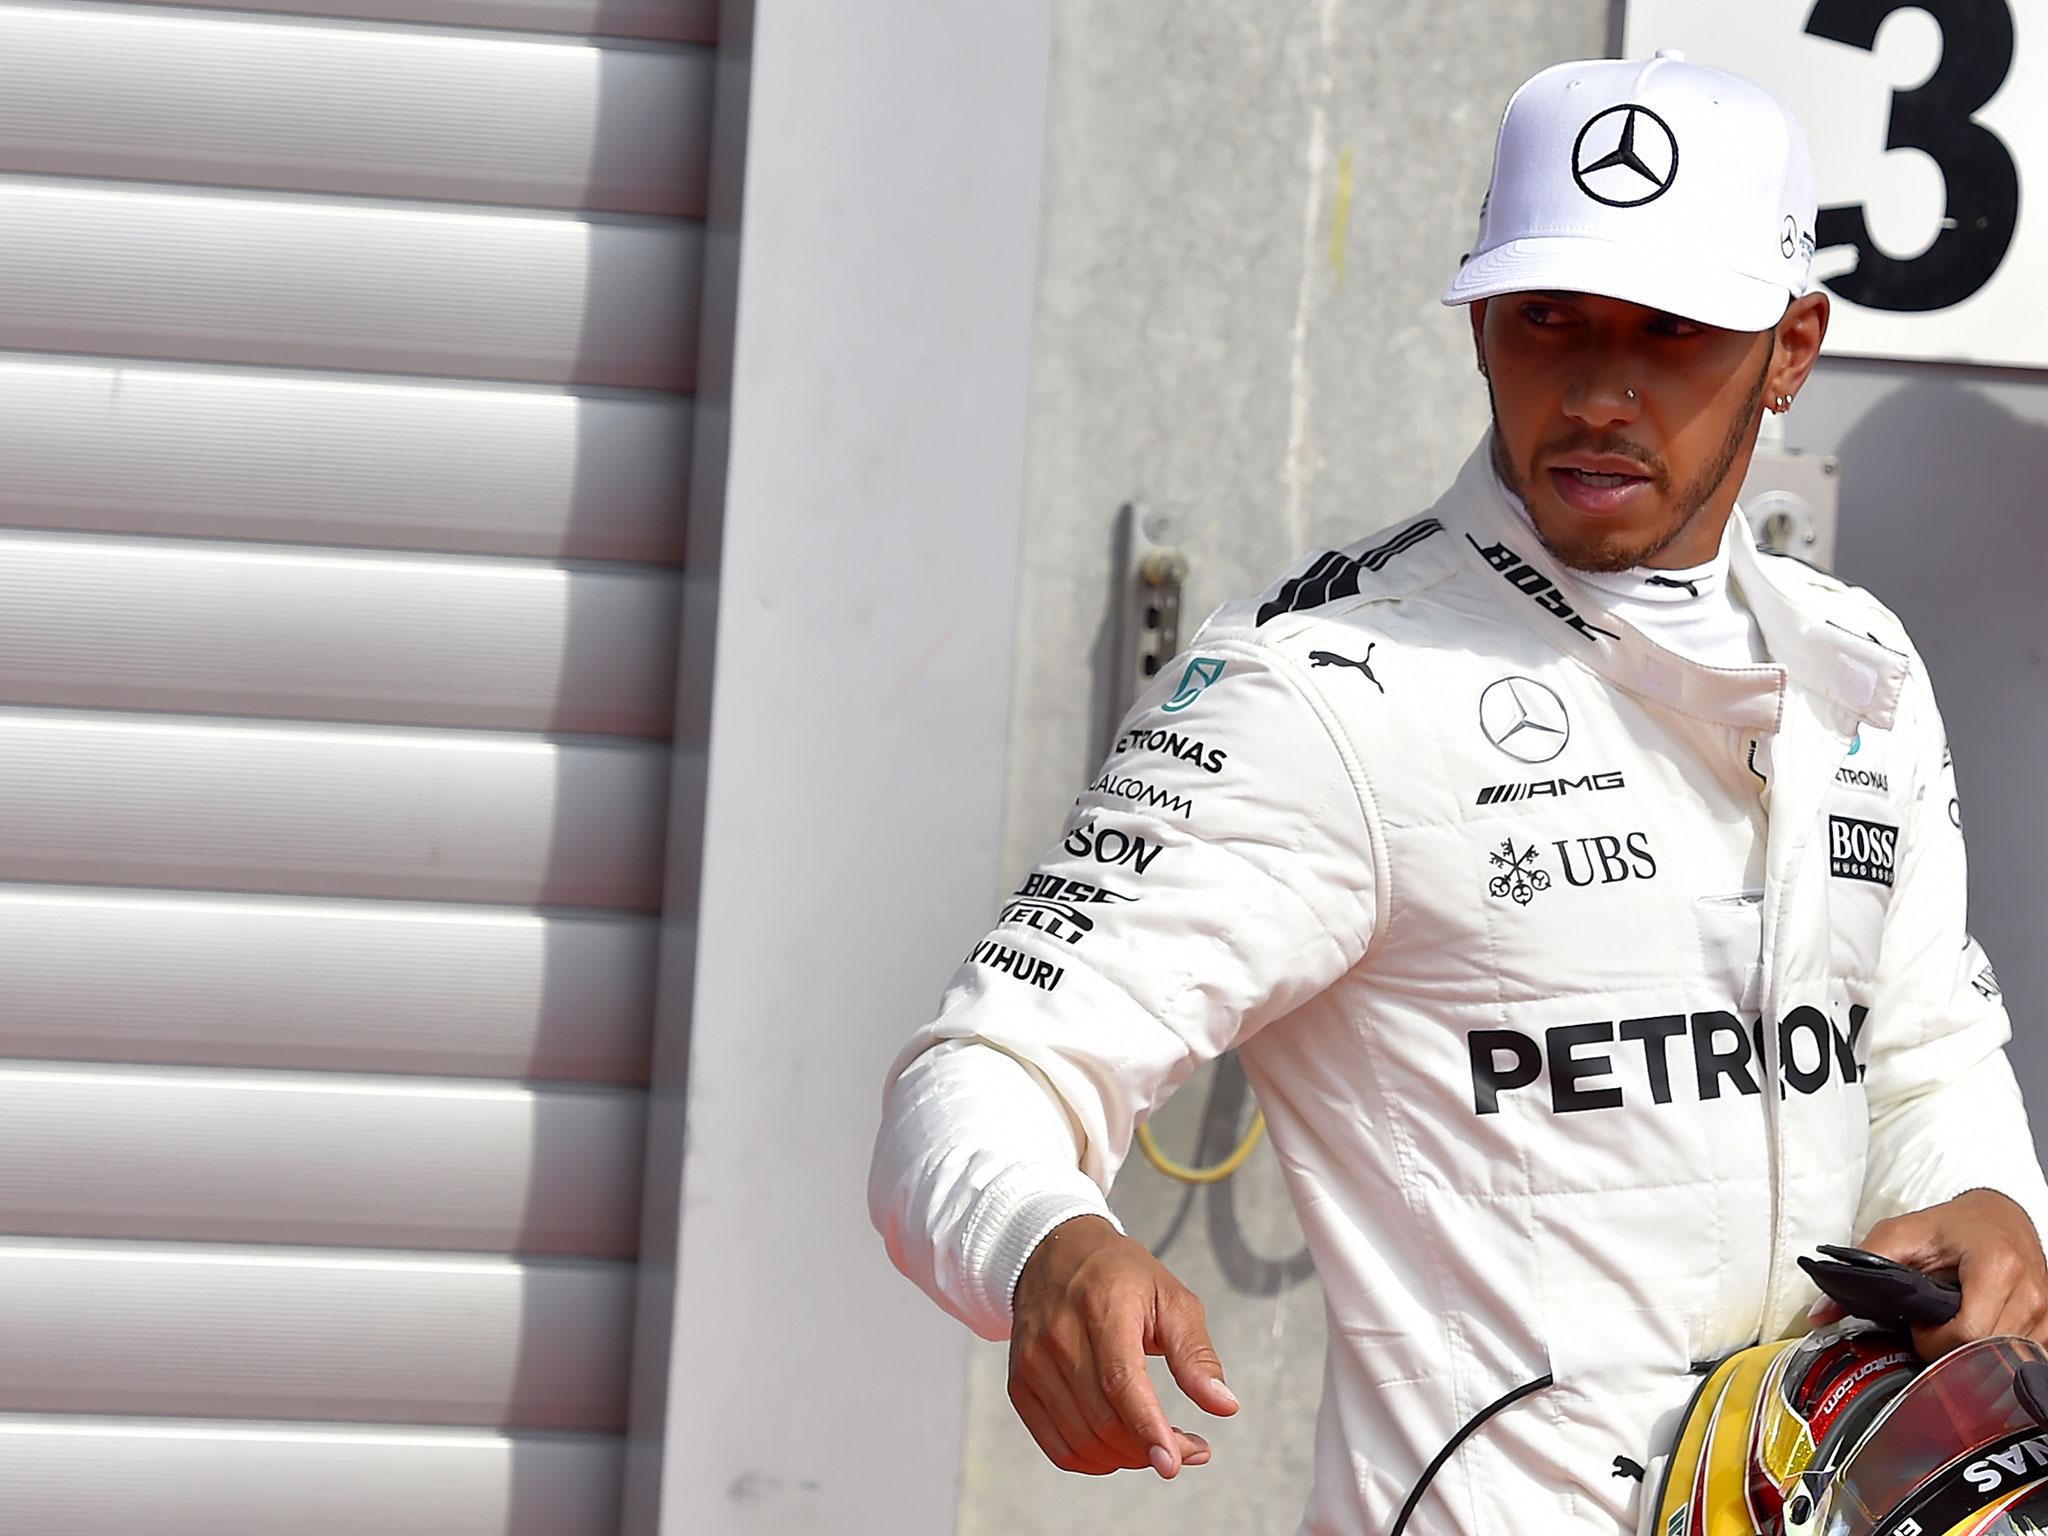 Lewis Hamilton said Saturday's victory wasn't won on race pace but track position